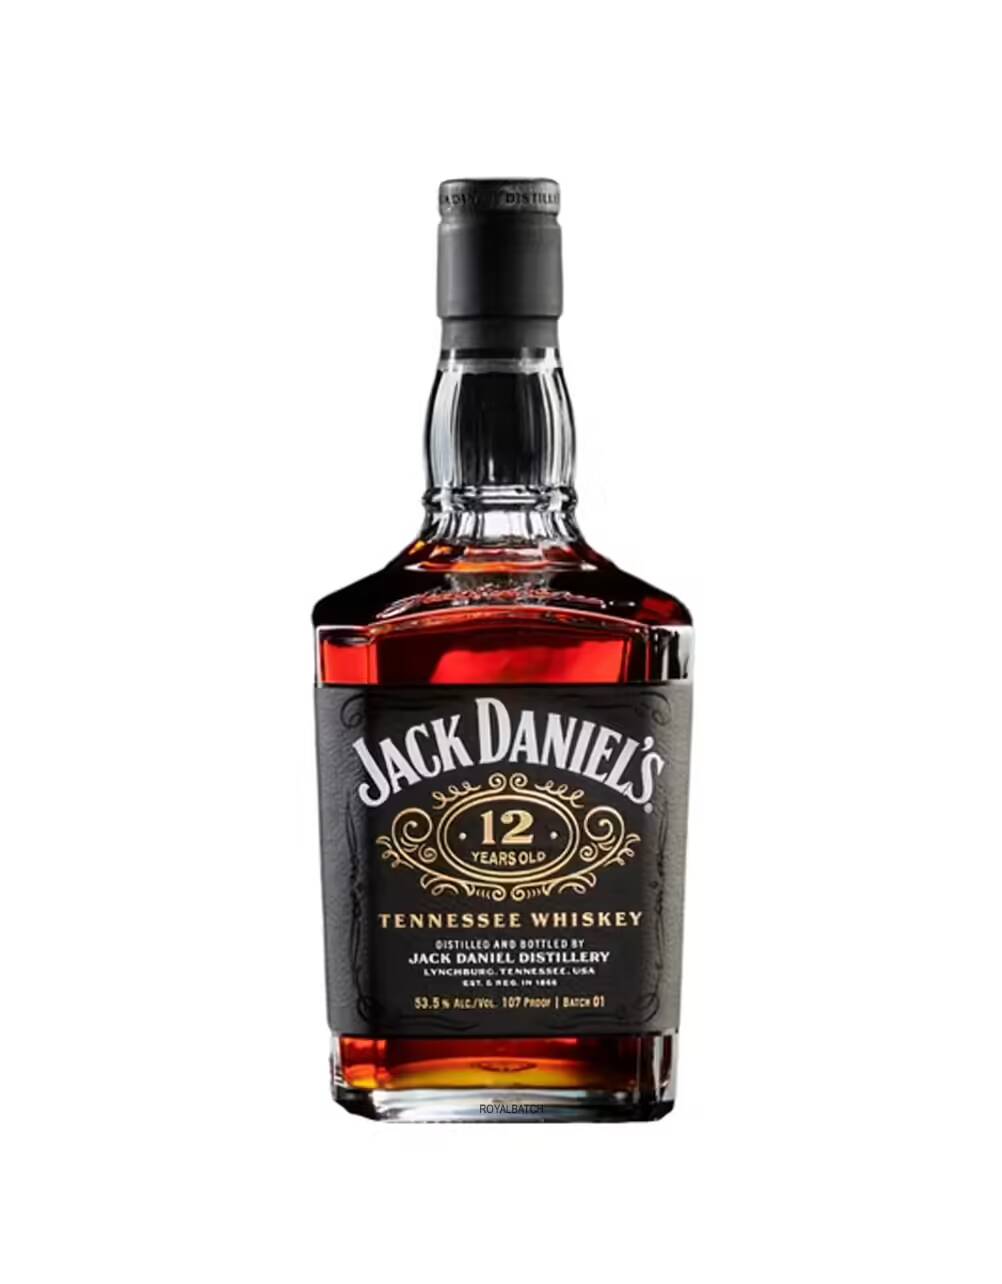 Jack Daniels 12 Year Old Batch 1 Tennessee Whiskey